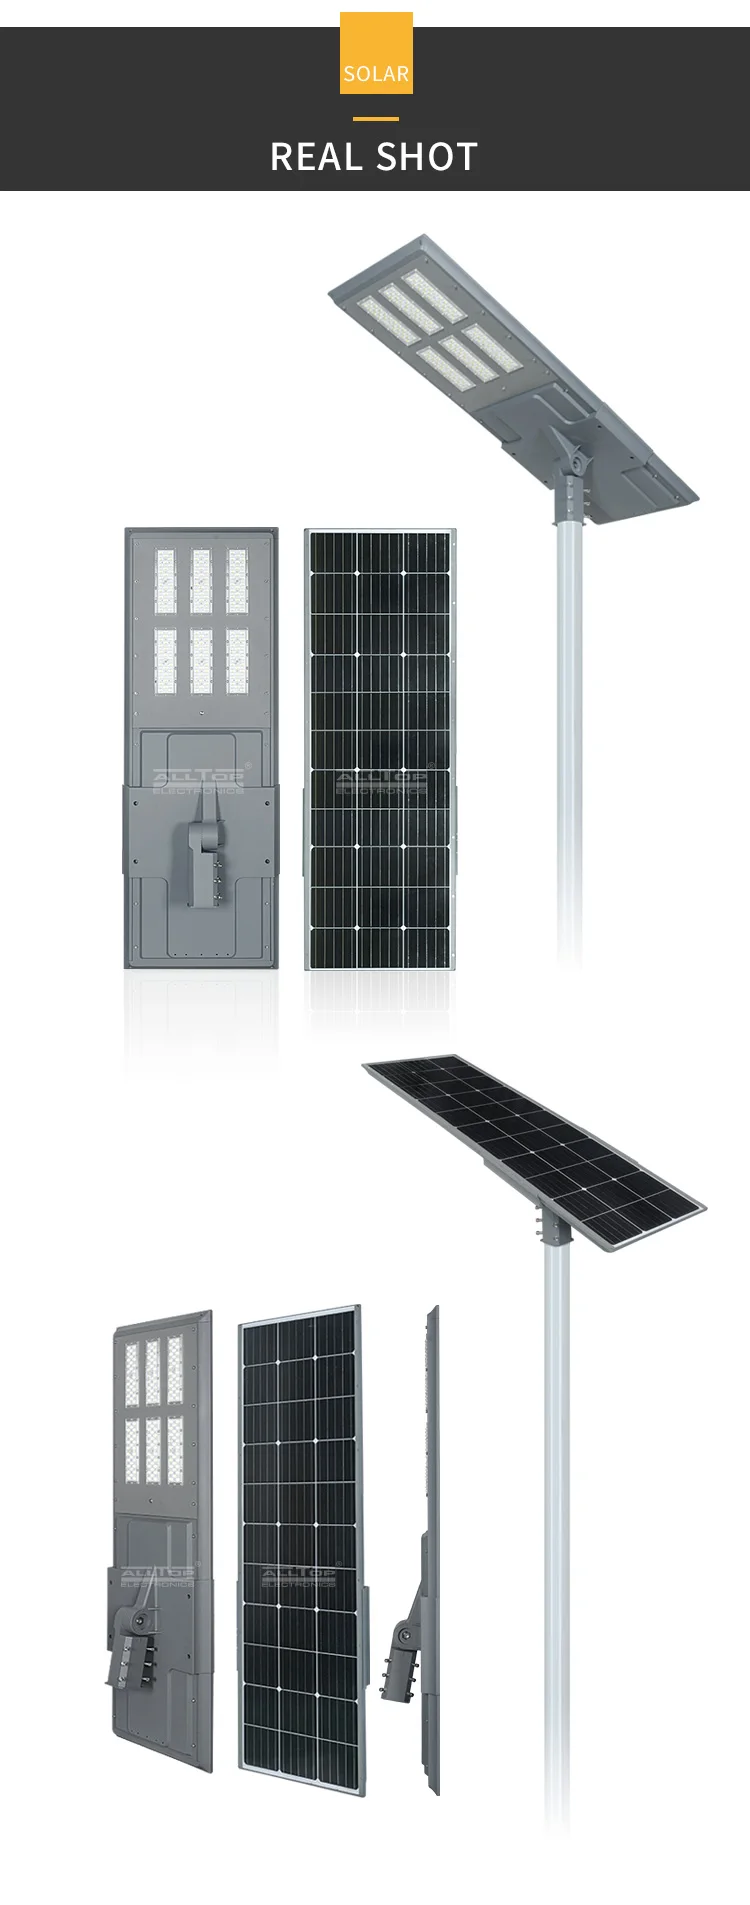 ALLTOP High power outdoor waterproof aluminum housing ip65 200w integrated all in one solar led street light